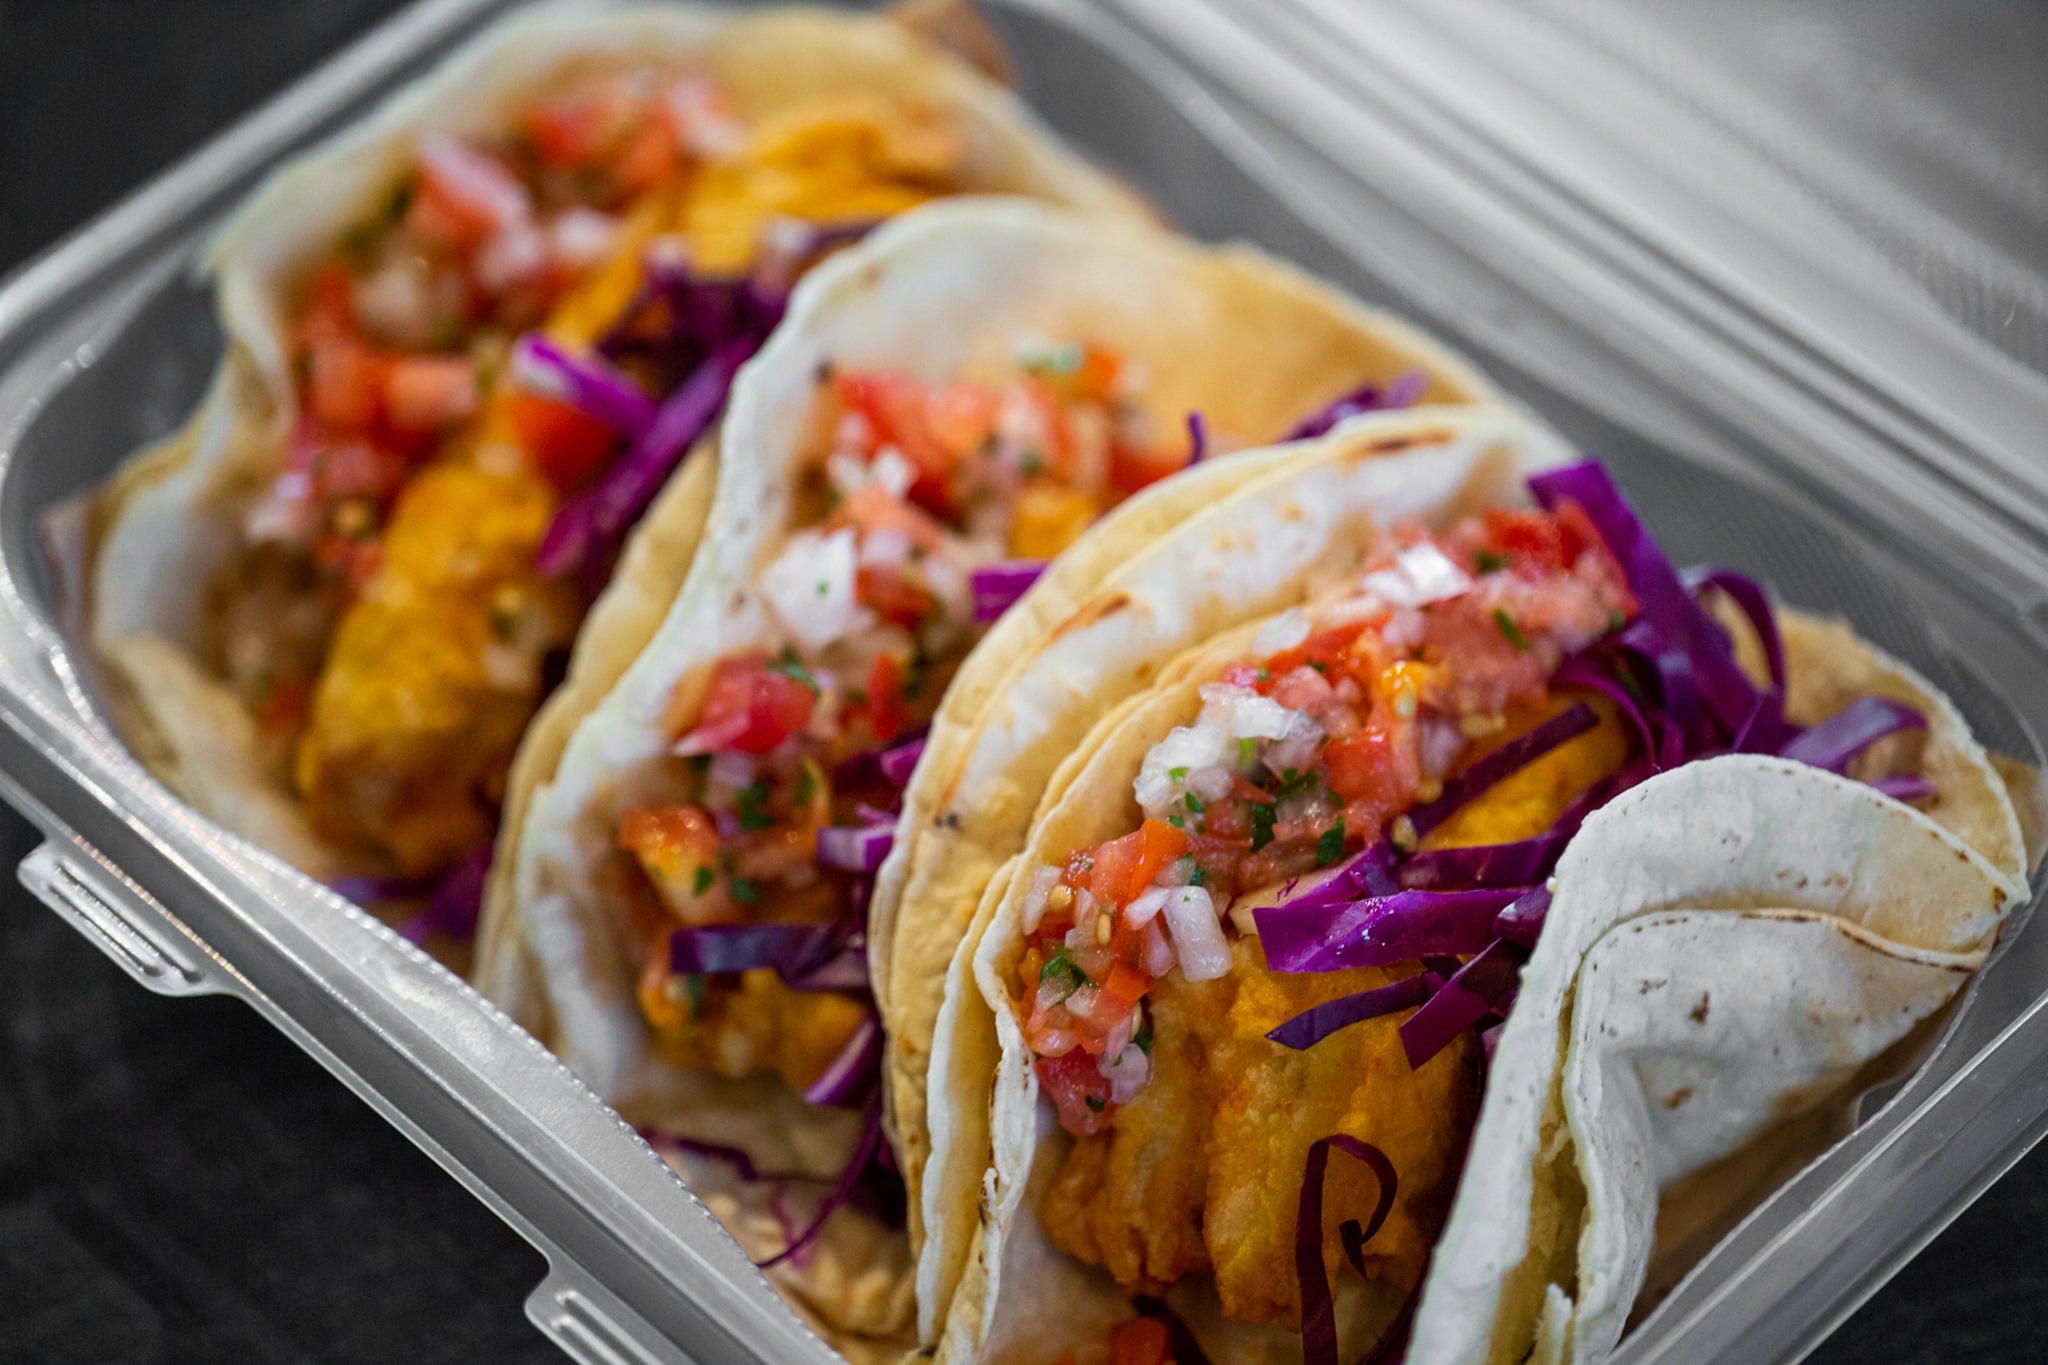 Made from scratch fish tacos Daily Taco and Cantina Thiensville (262)236-9463